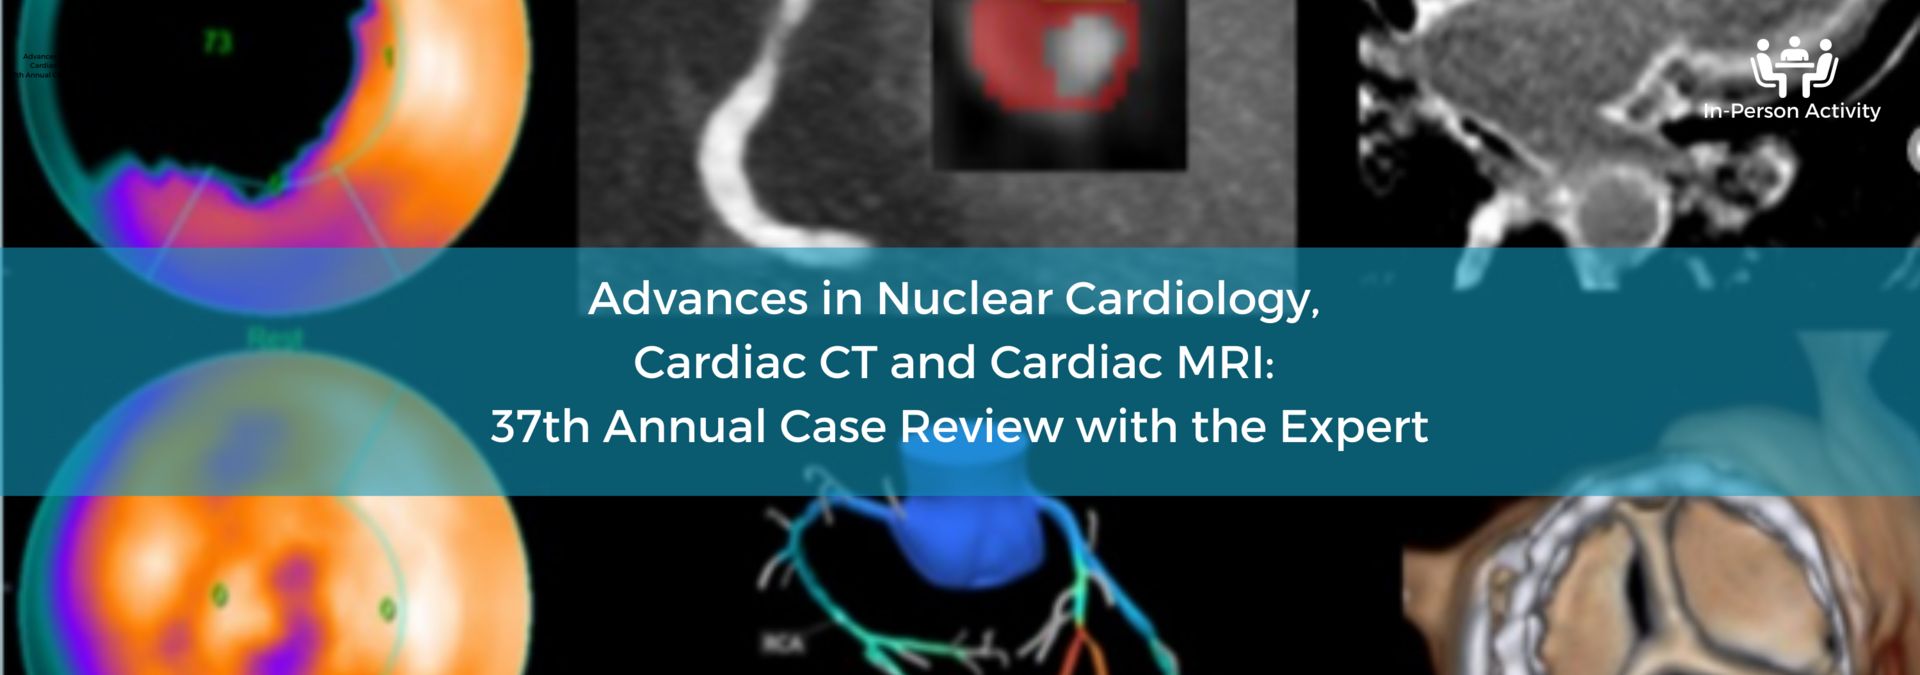 Advances in Nuclear Cardiology, Cardiac CT and Cardiac MRI: 37th Annual Case Review with the Experts, Los Angeles, California, United States